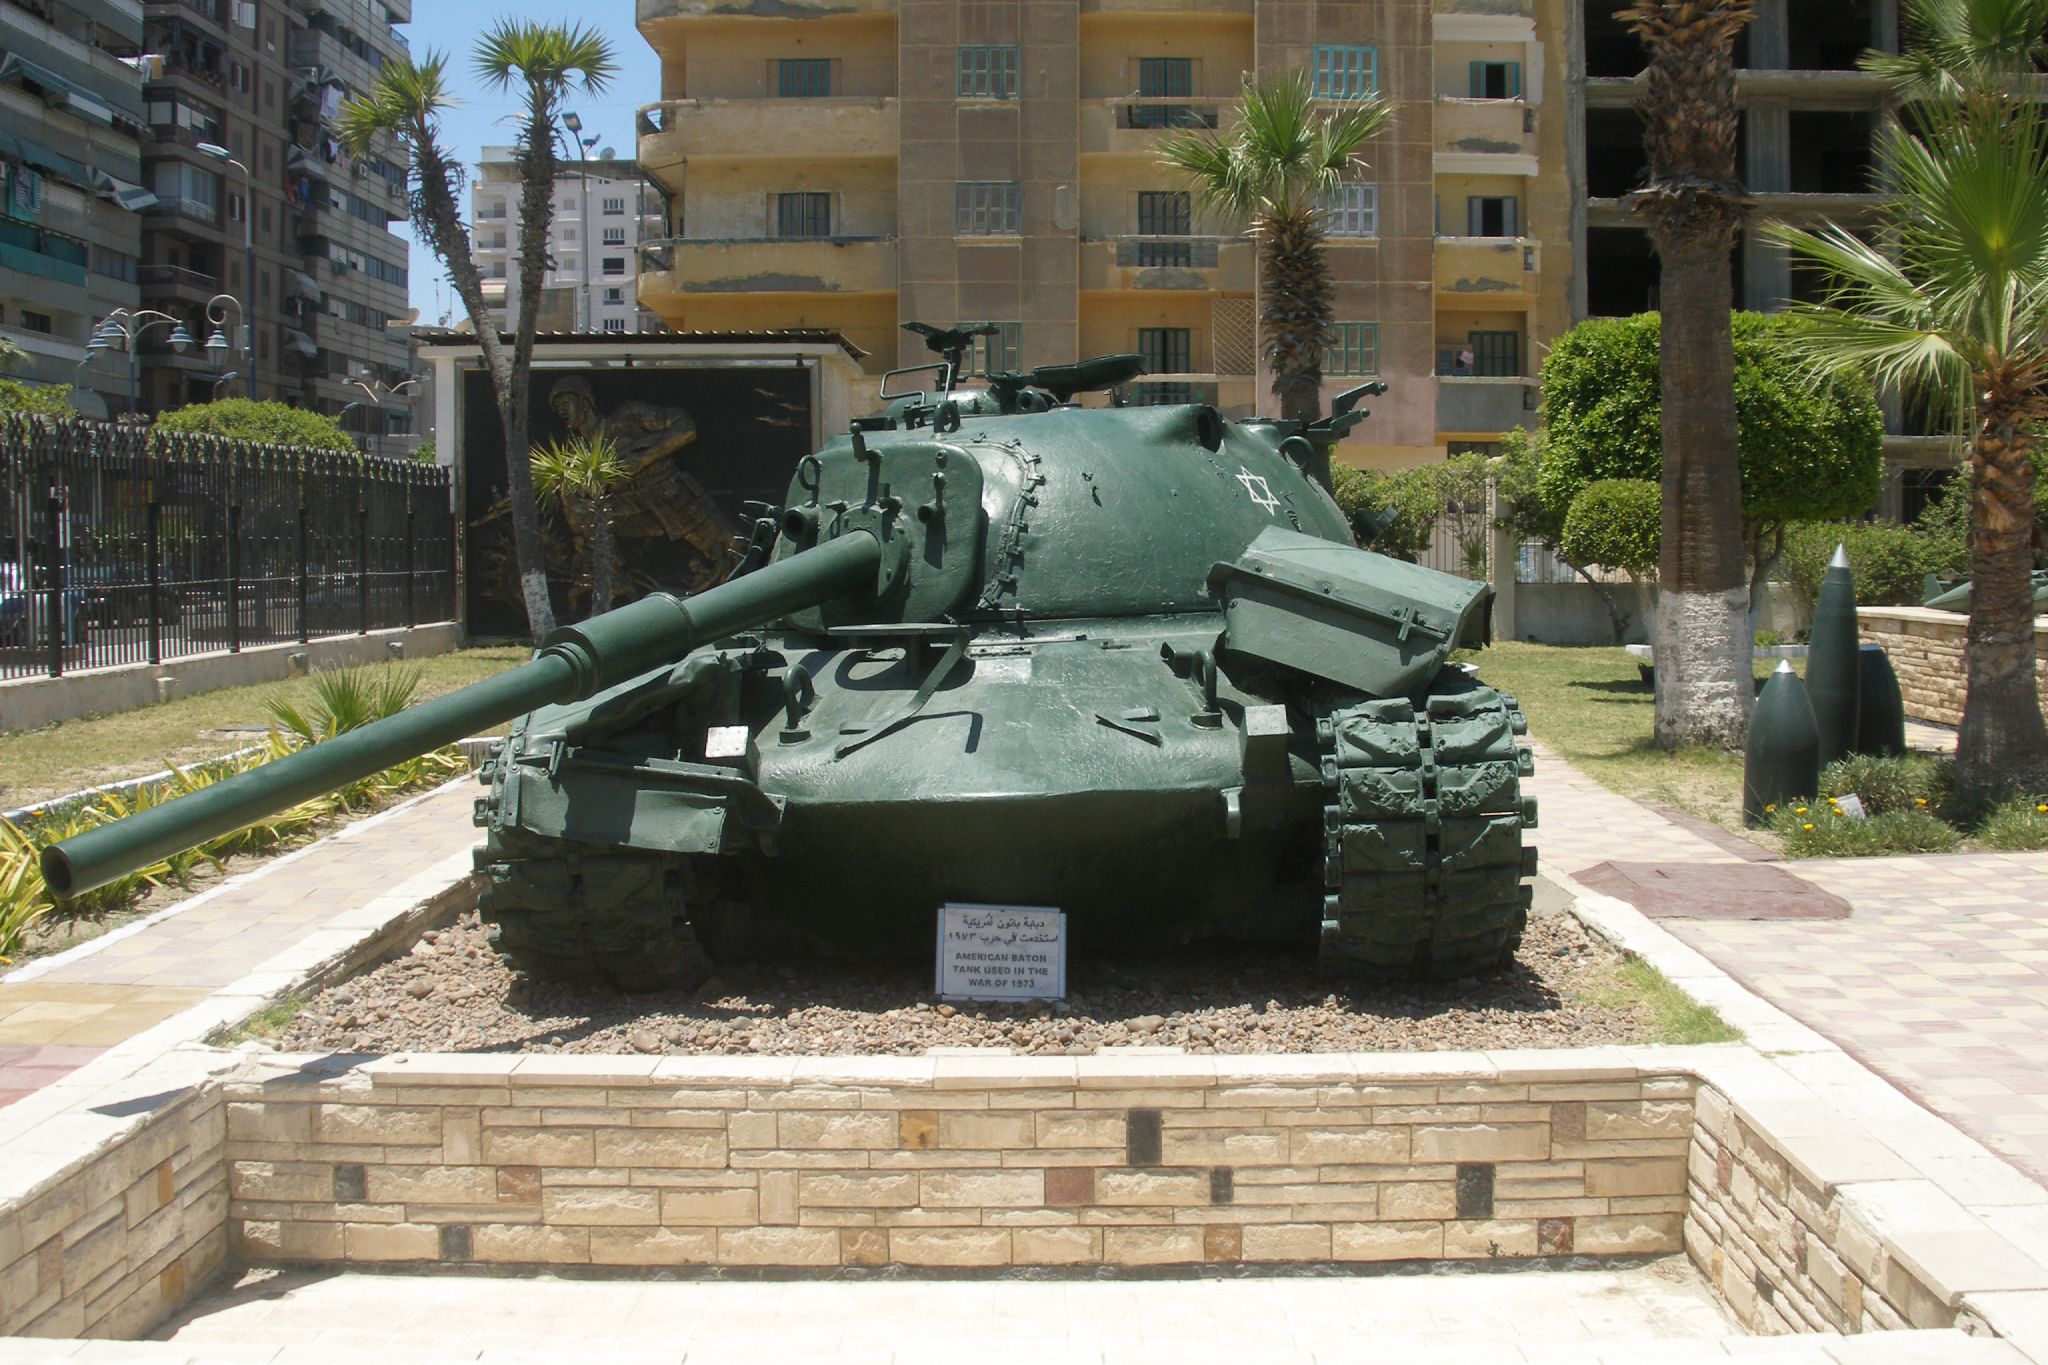 the large green tank is parked in a garden